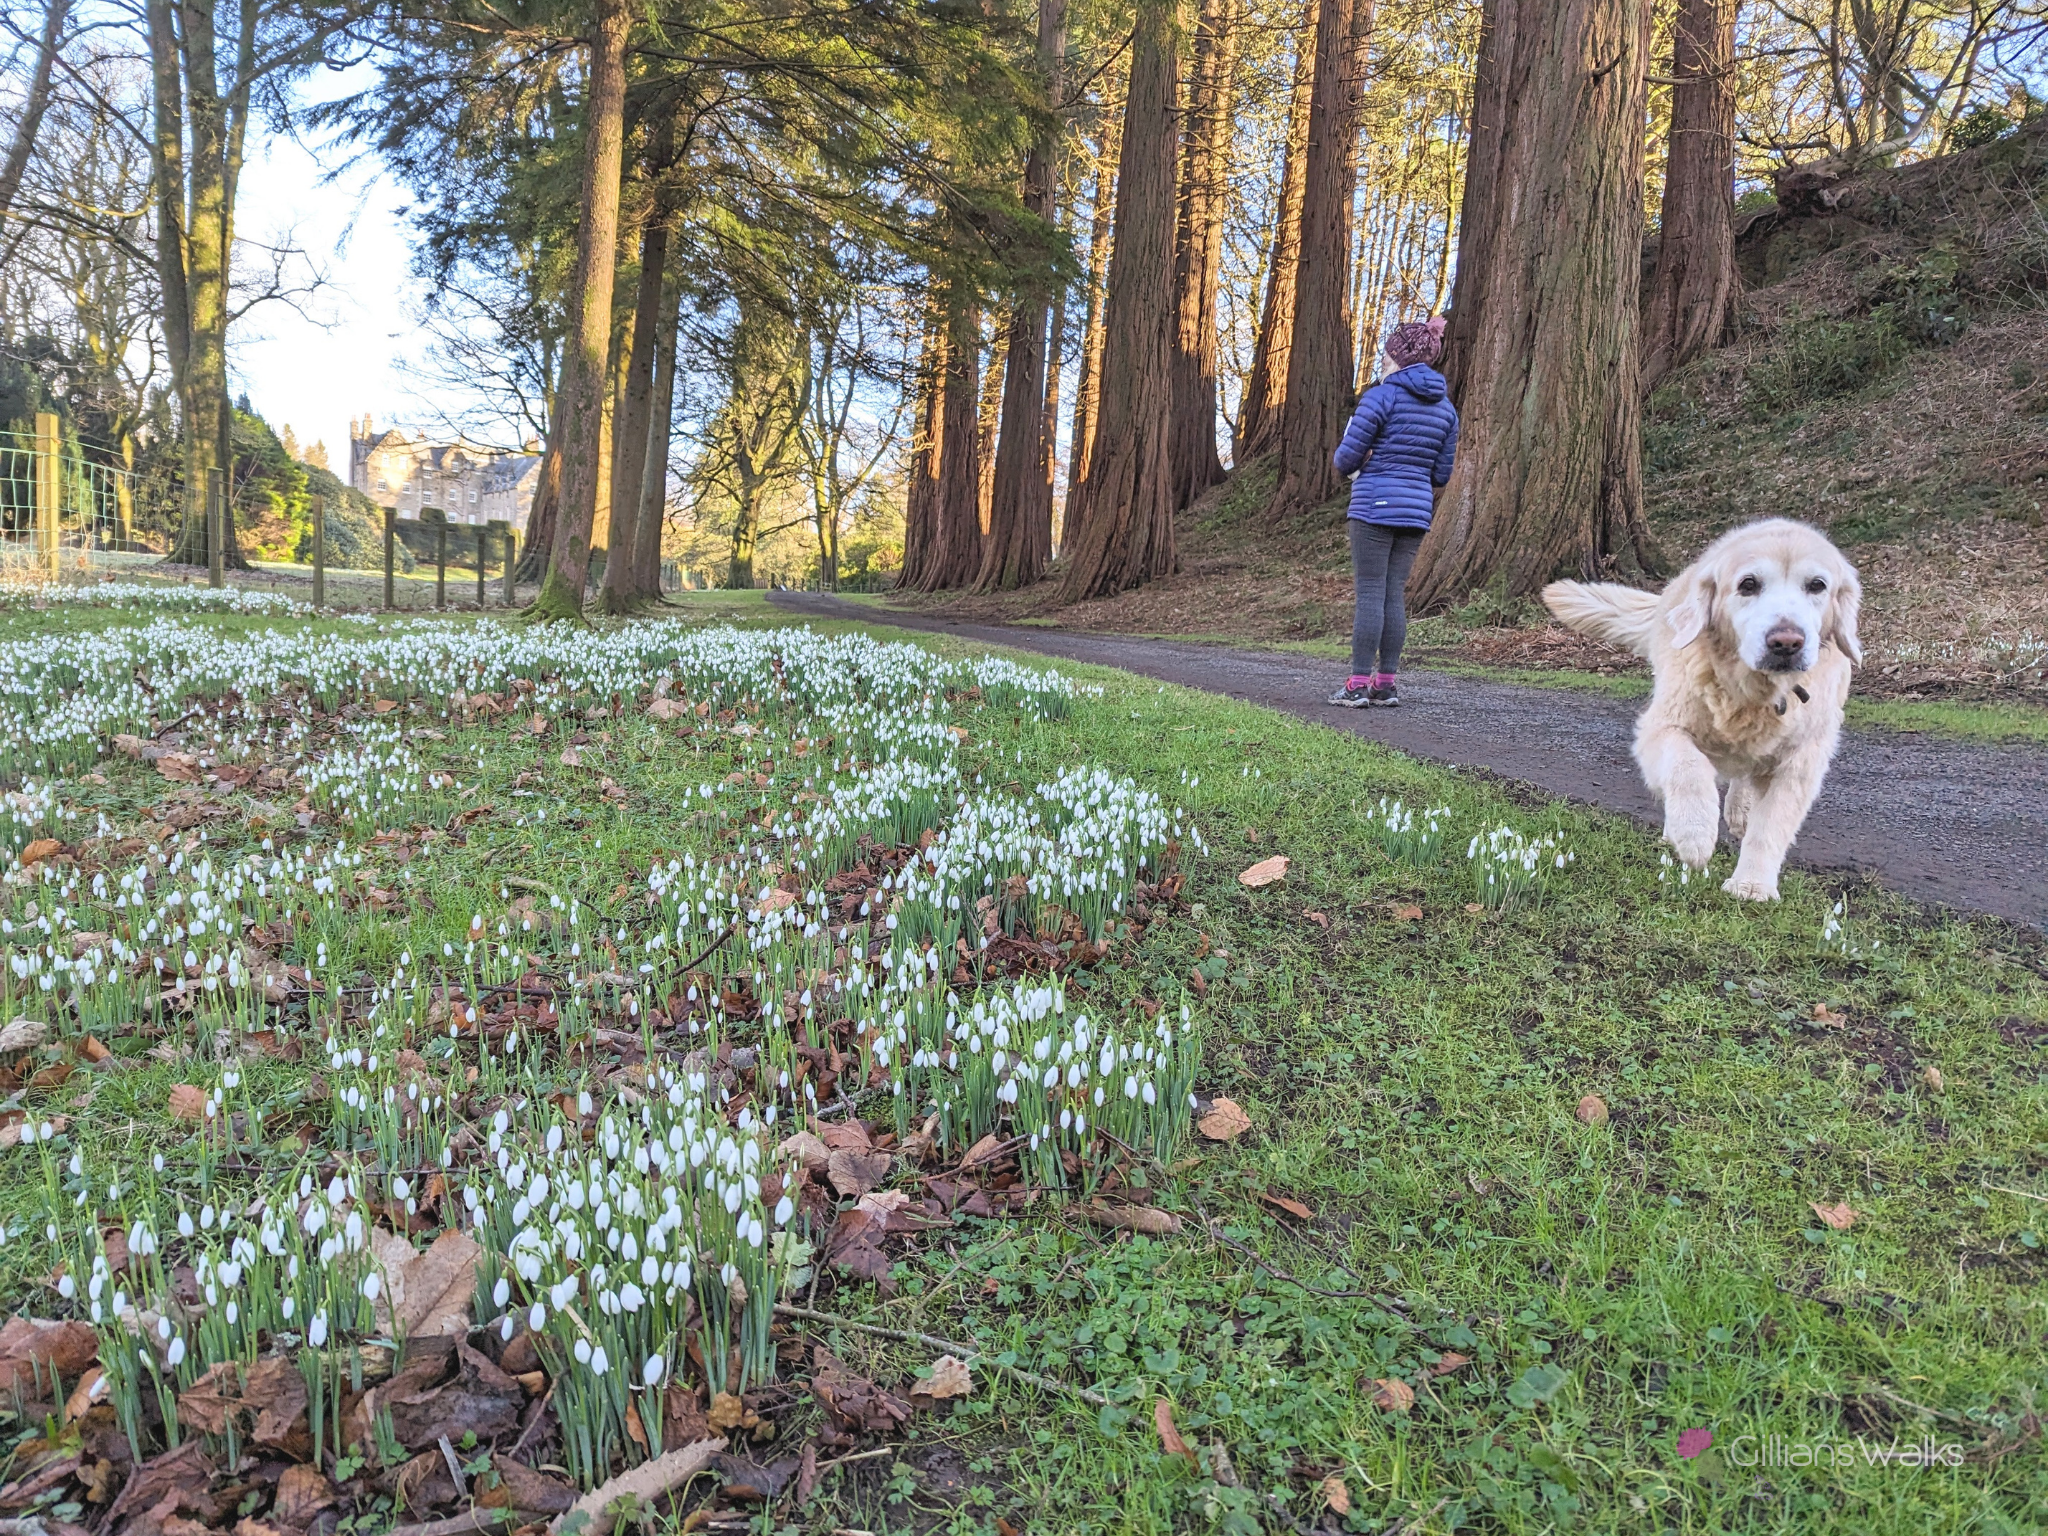 A golden retriever dog running towards the camera as it was being used to take a photo of some snowdrops in the grass